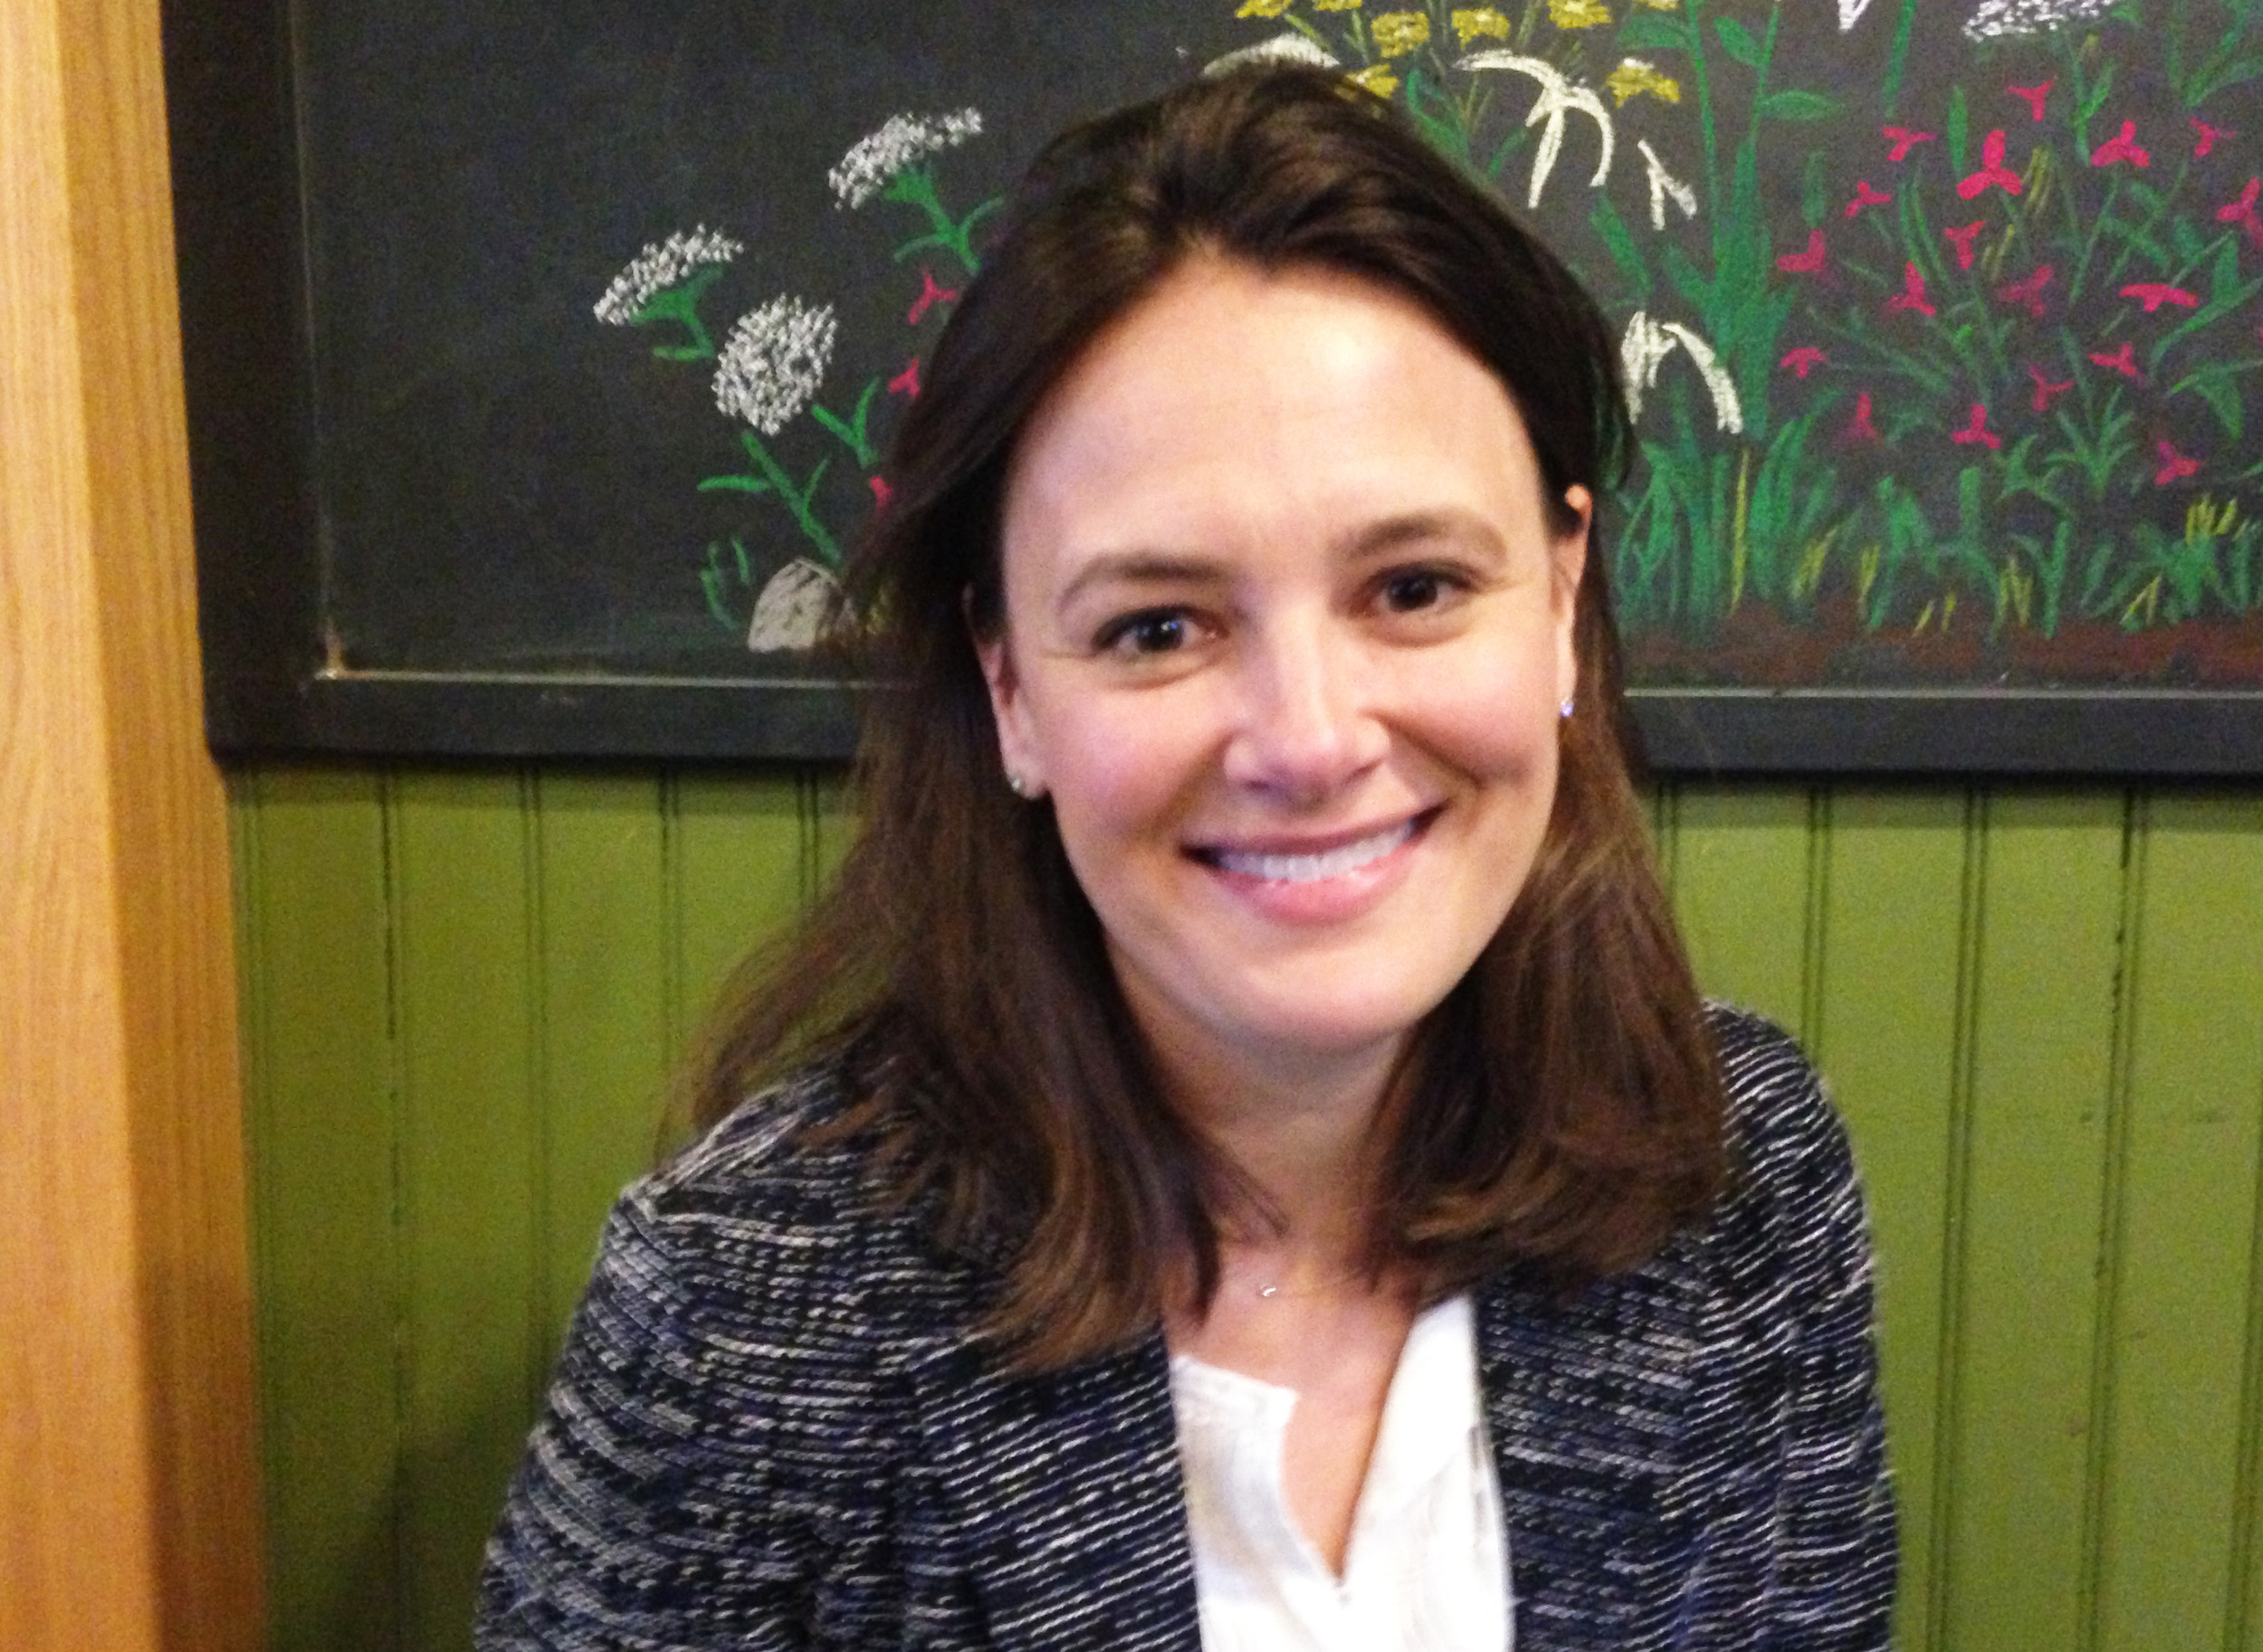 Rachel Flum, executive director of the Economic Policy Institute, interviewed by ConvergenceRI at Olga's Cup and Saucer, talking about the state budget.